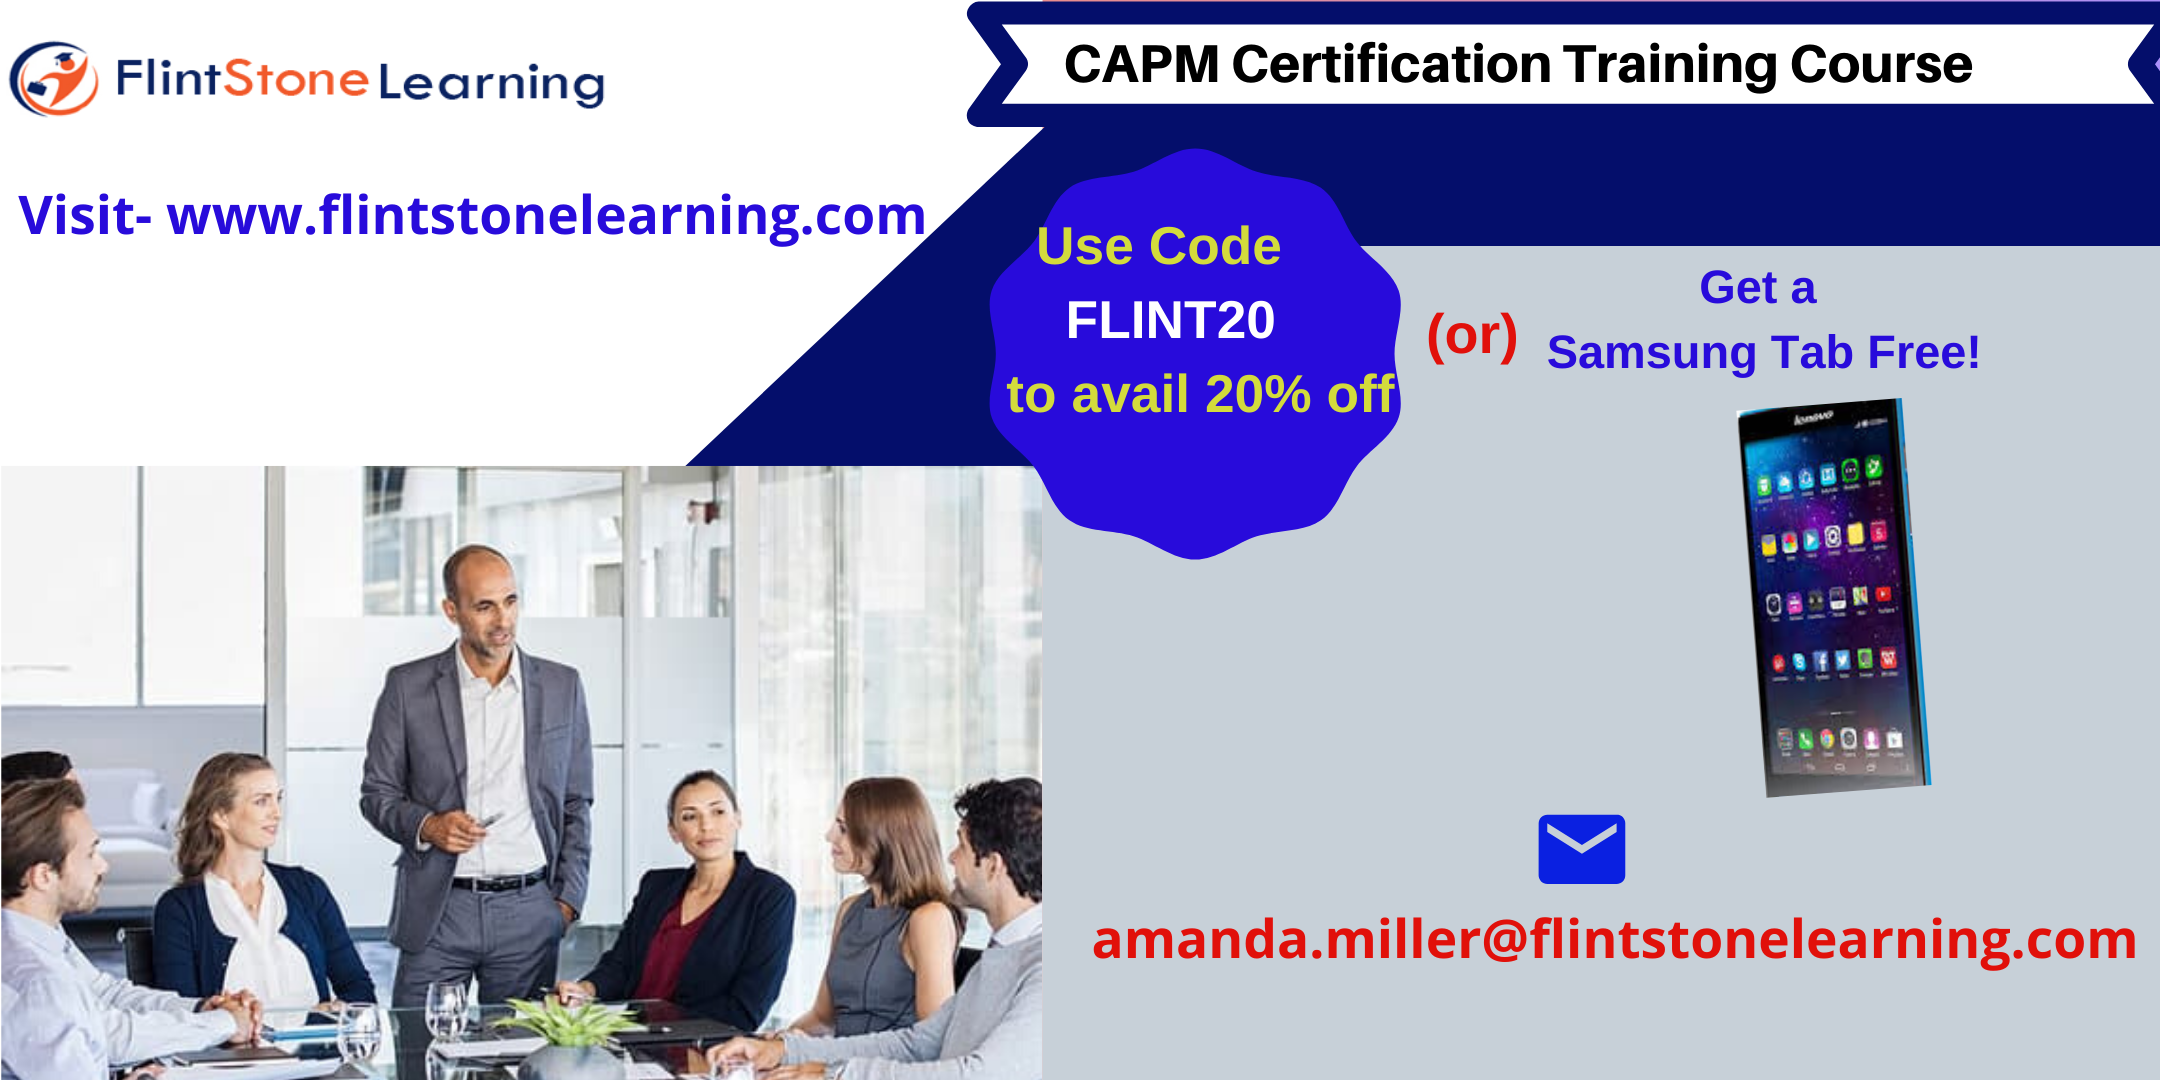 CAPM Certification Training Course in National City, CA